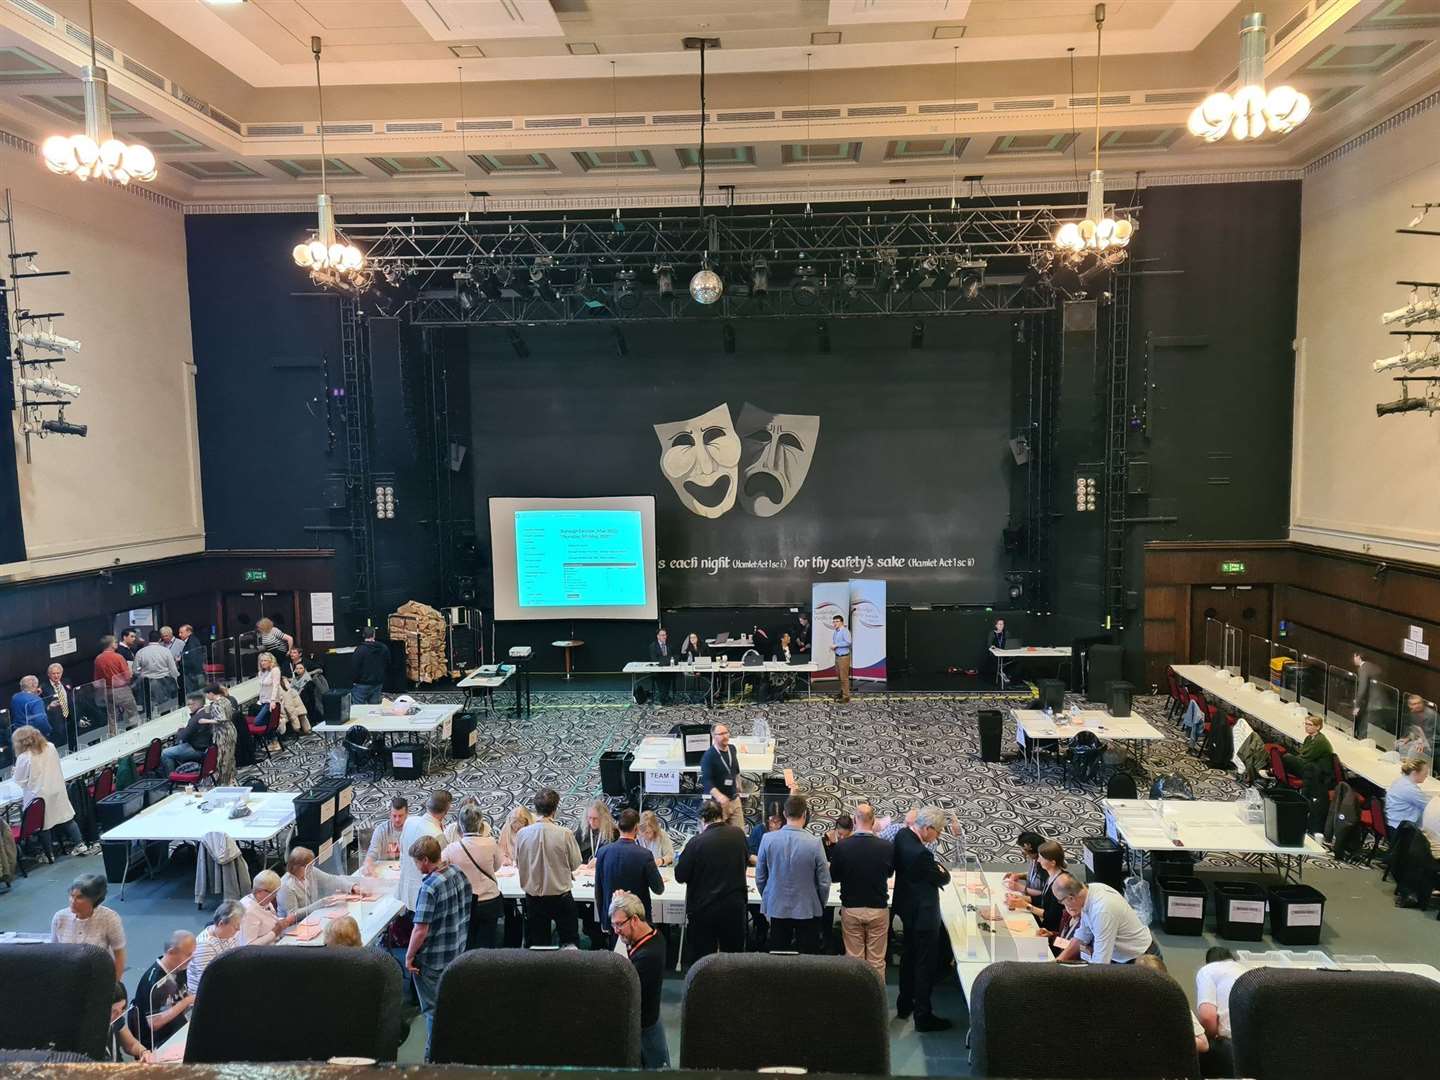 Votes for the 2022 TWBC elections are being counted in the Assembly Hall Theatre, Tunbridge Wells